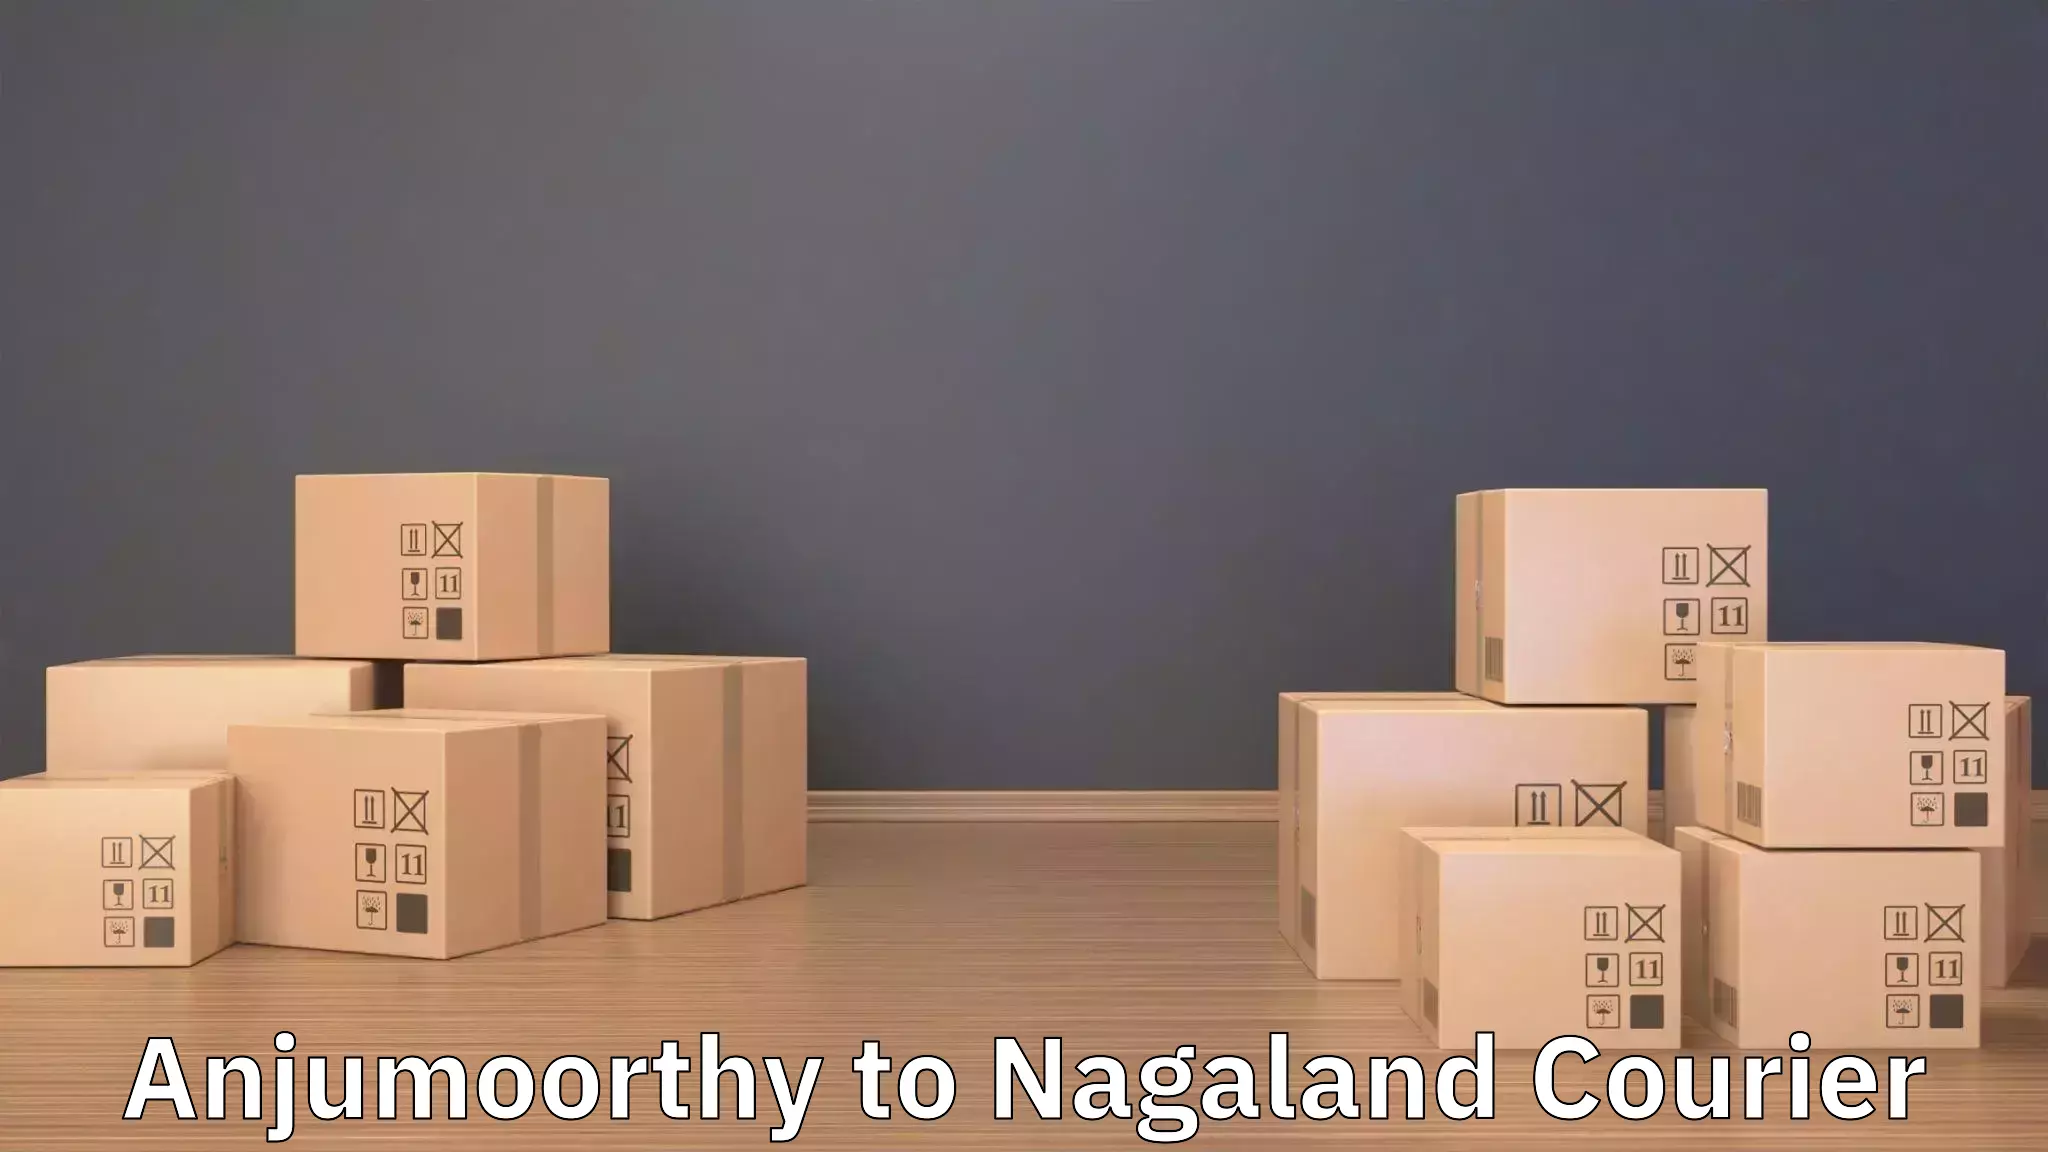 Quality relocation services Anjumoorthy to Nagaland